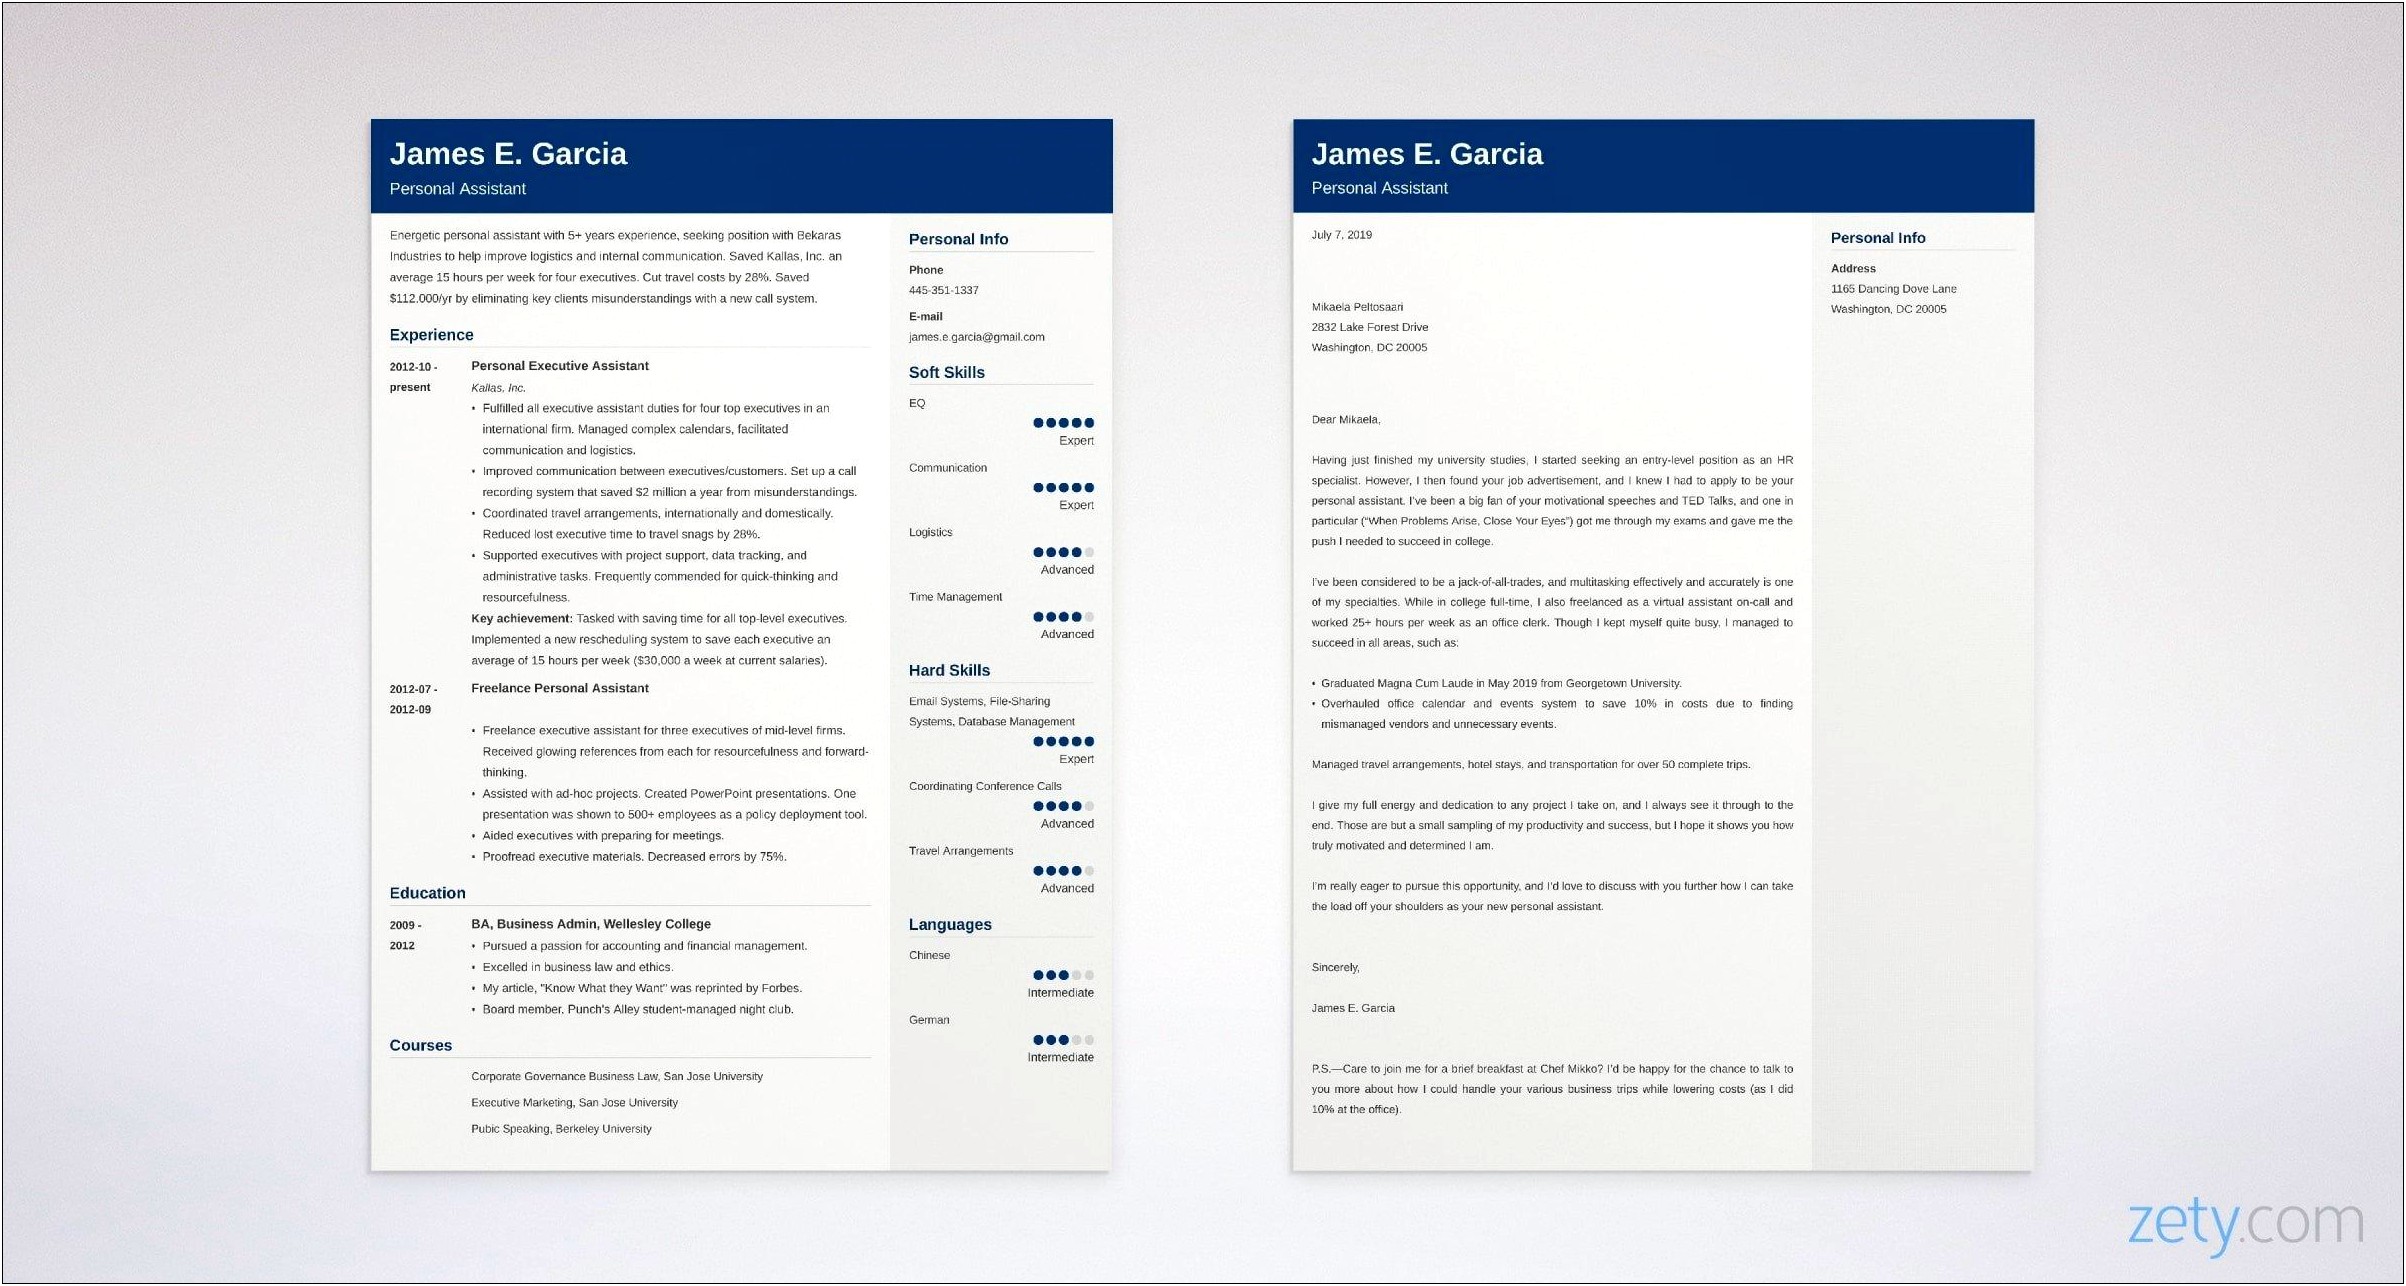 A Sample Resume And Cover Letter